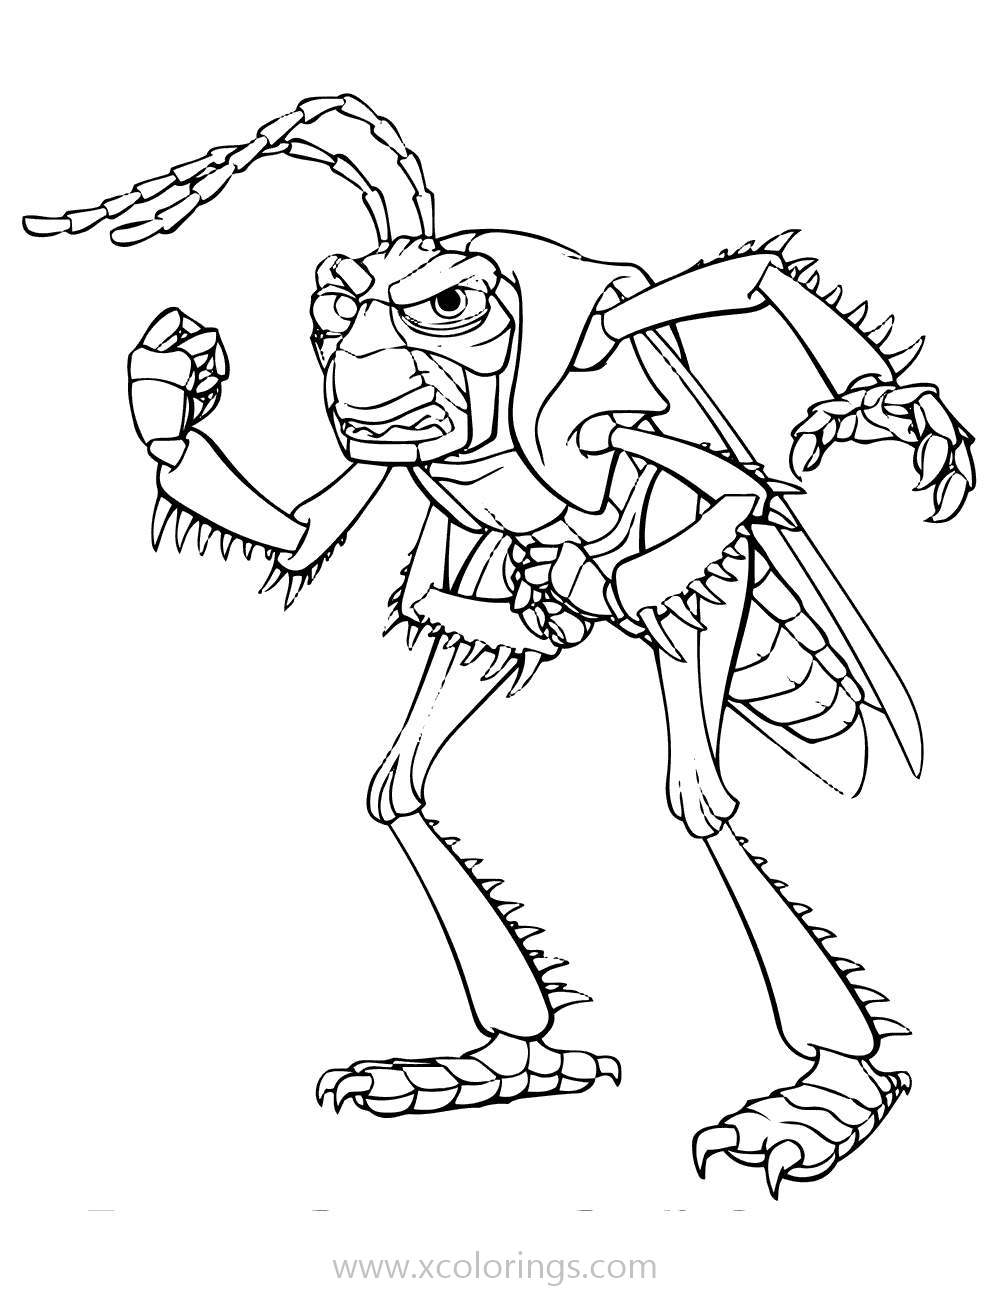 Free A Bugs Life Coloring Pages Hopper is Angry printable